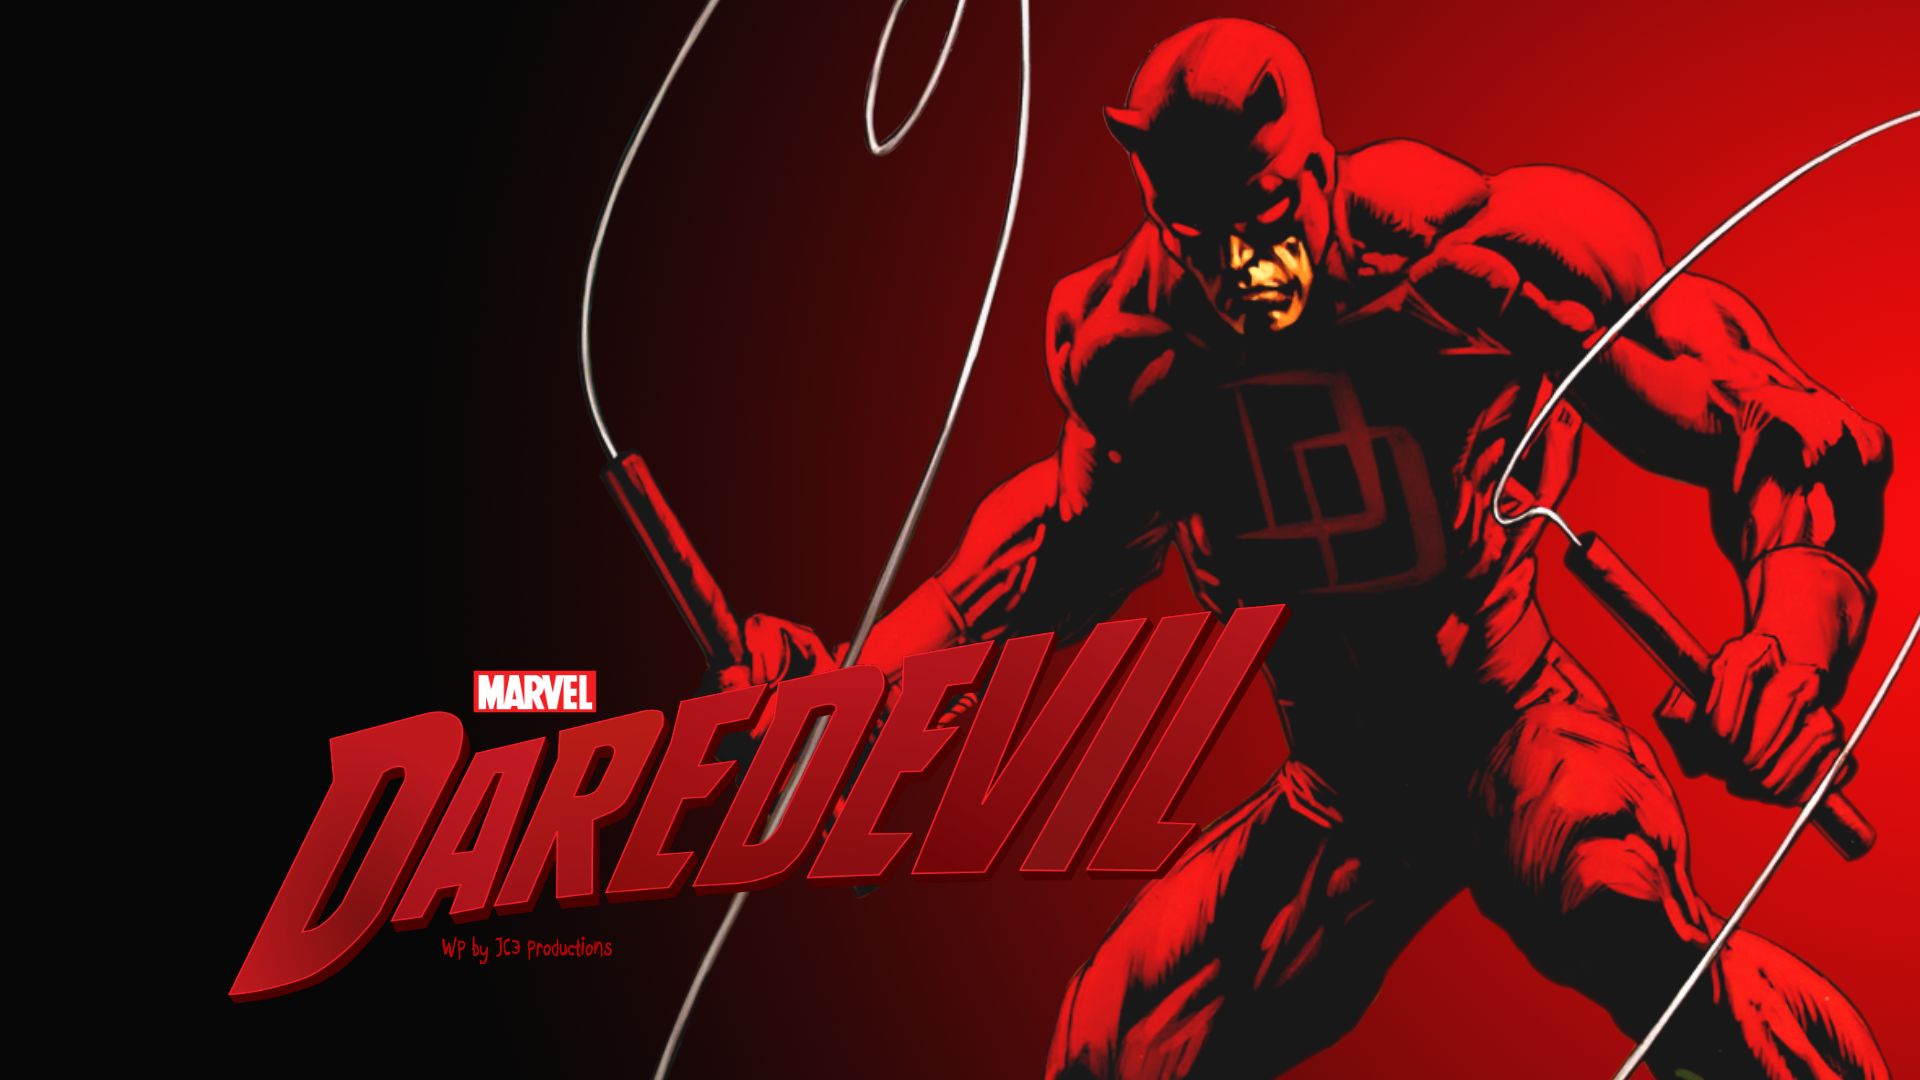 Daredevil Image HD Wallpaper And Background Photos